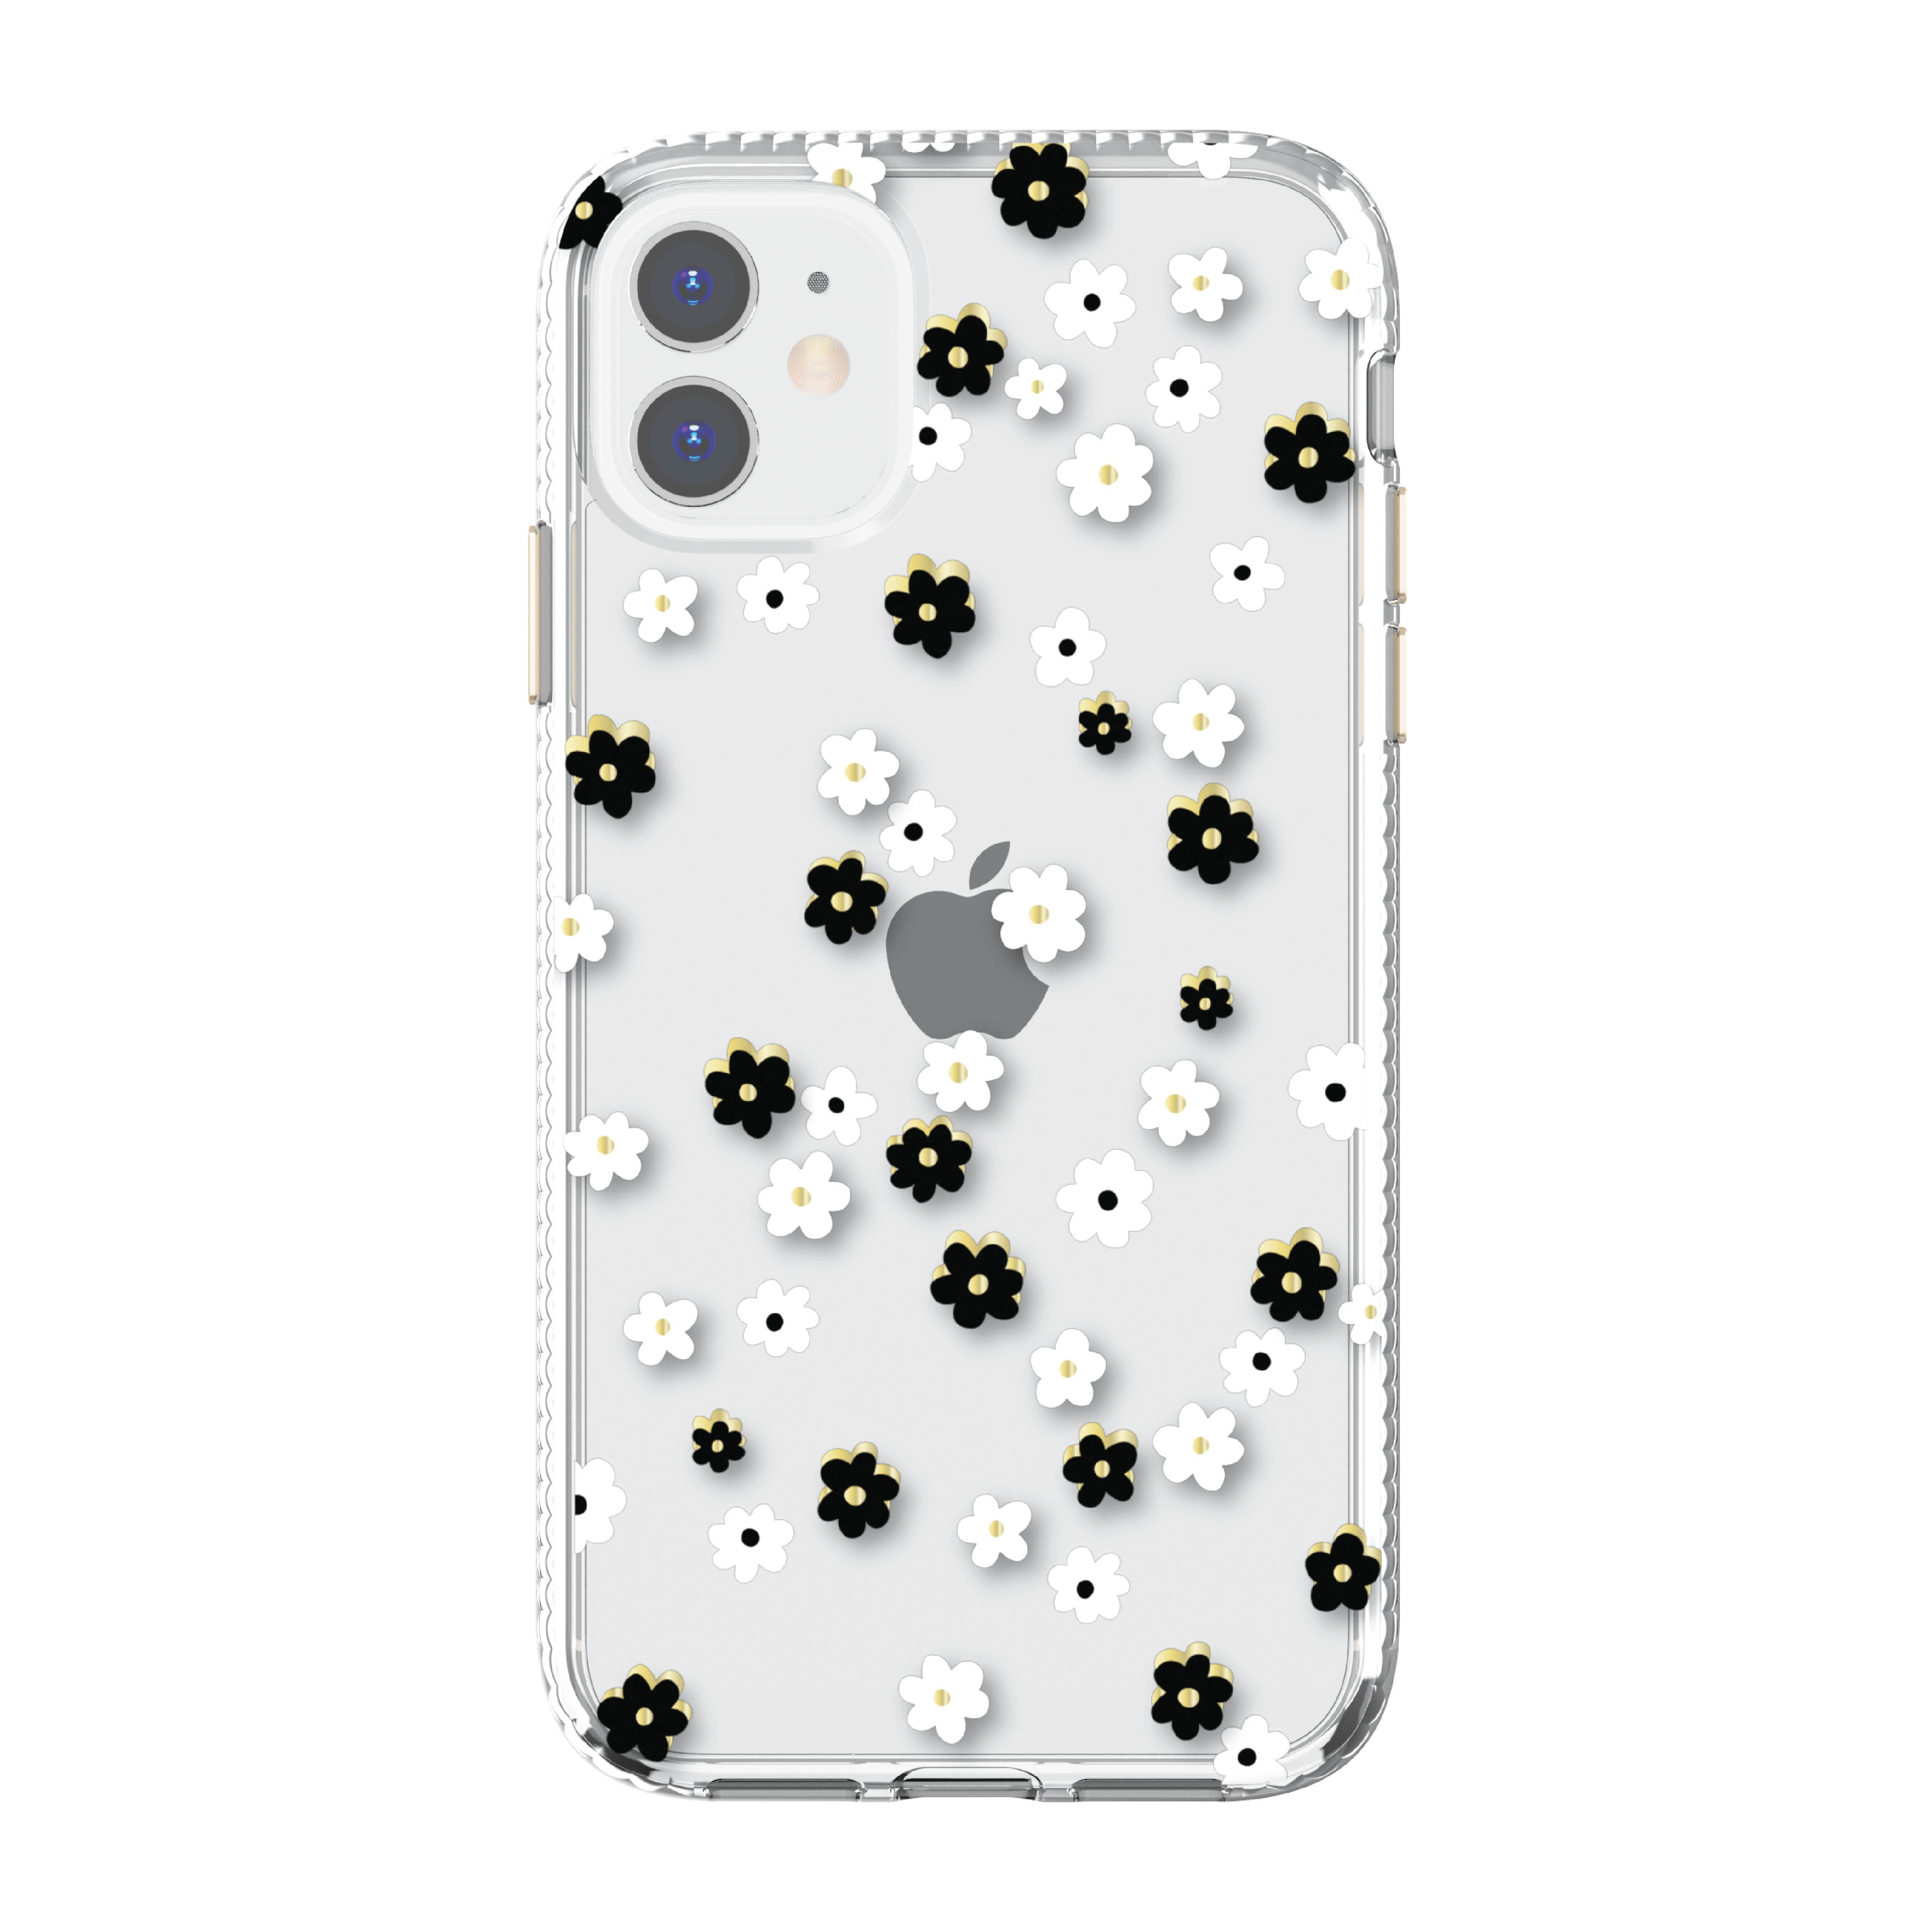 onn. Blue Floral Phone Case for iPhone 11 / iPhone XR 